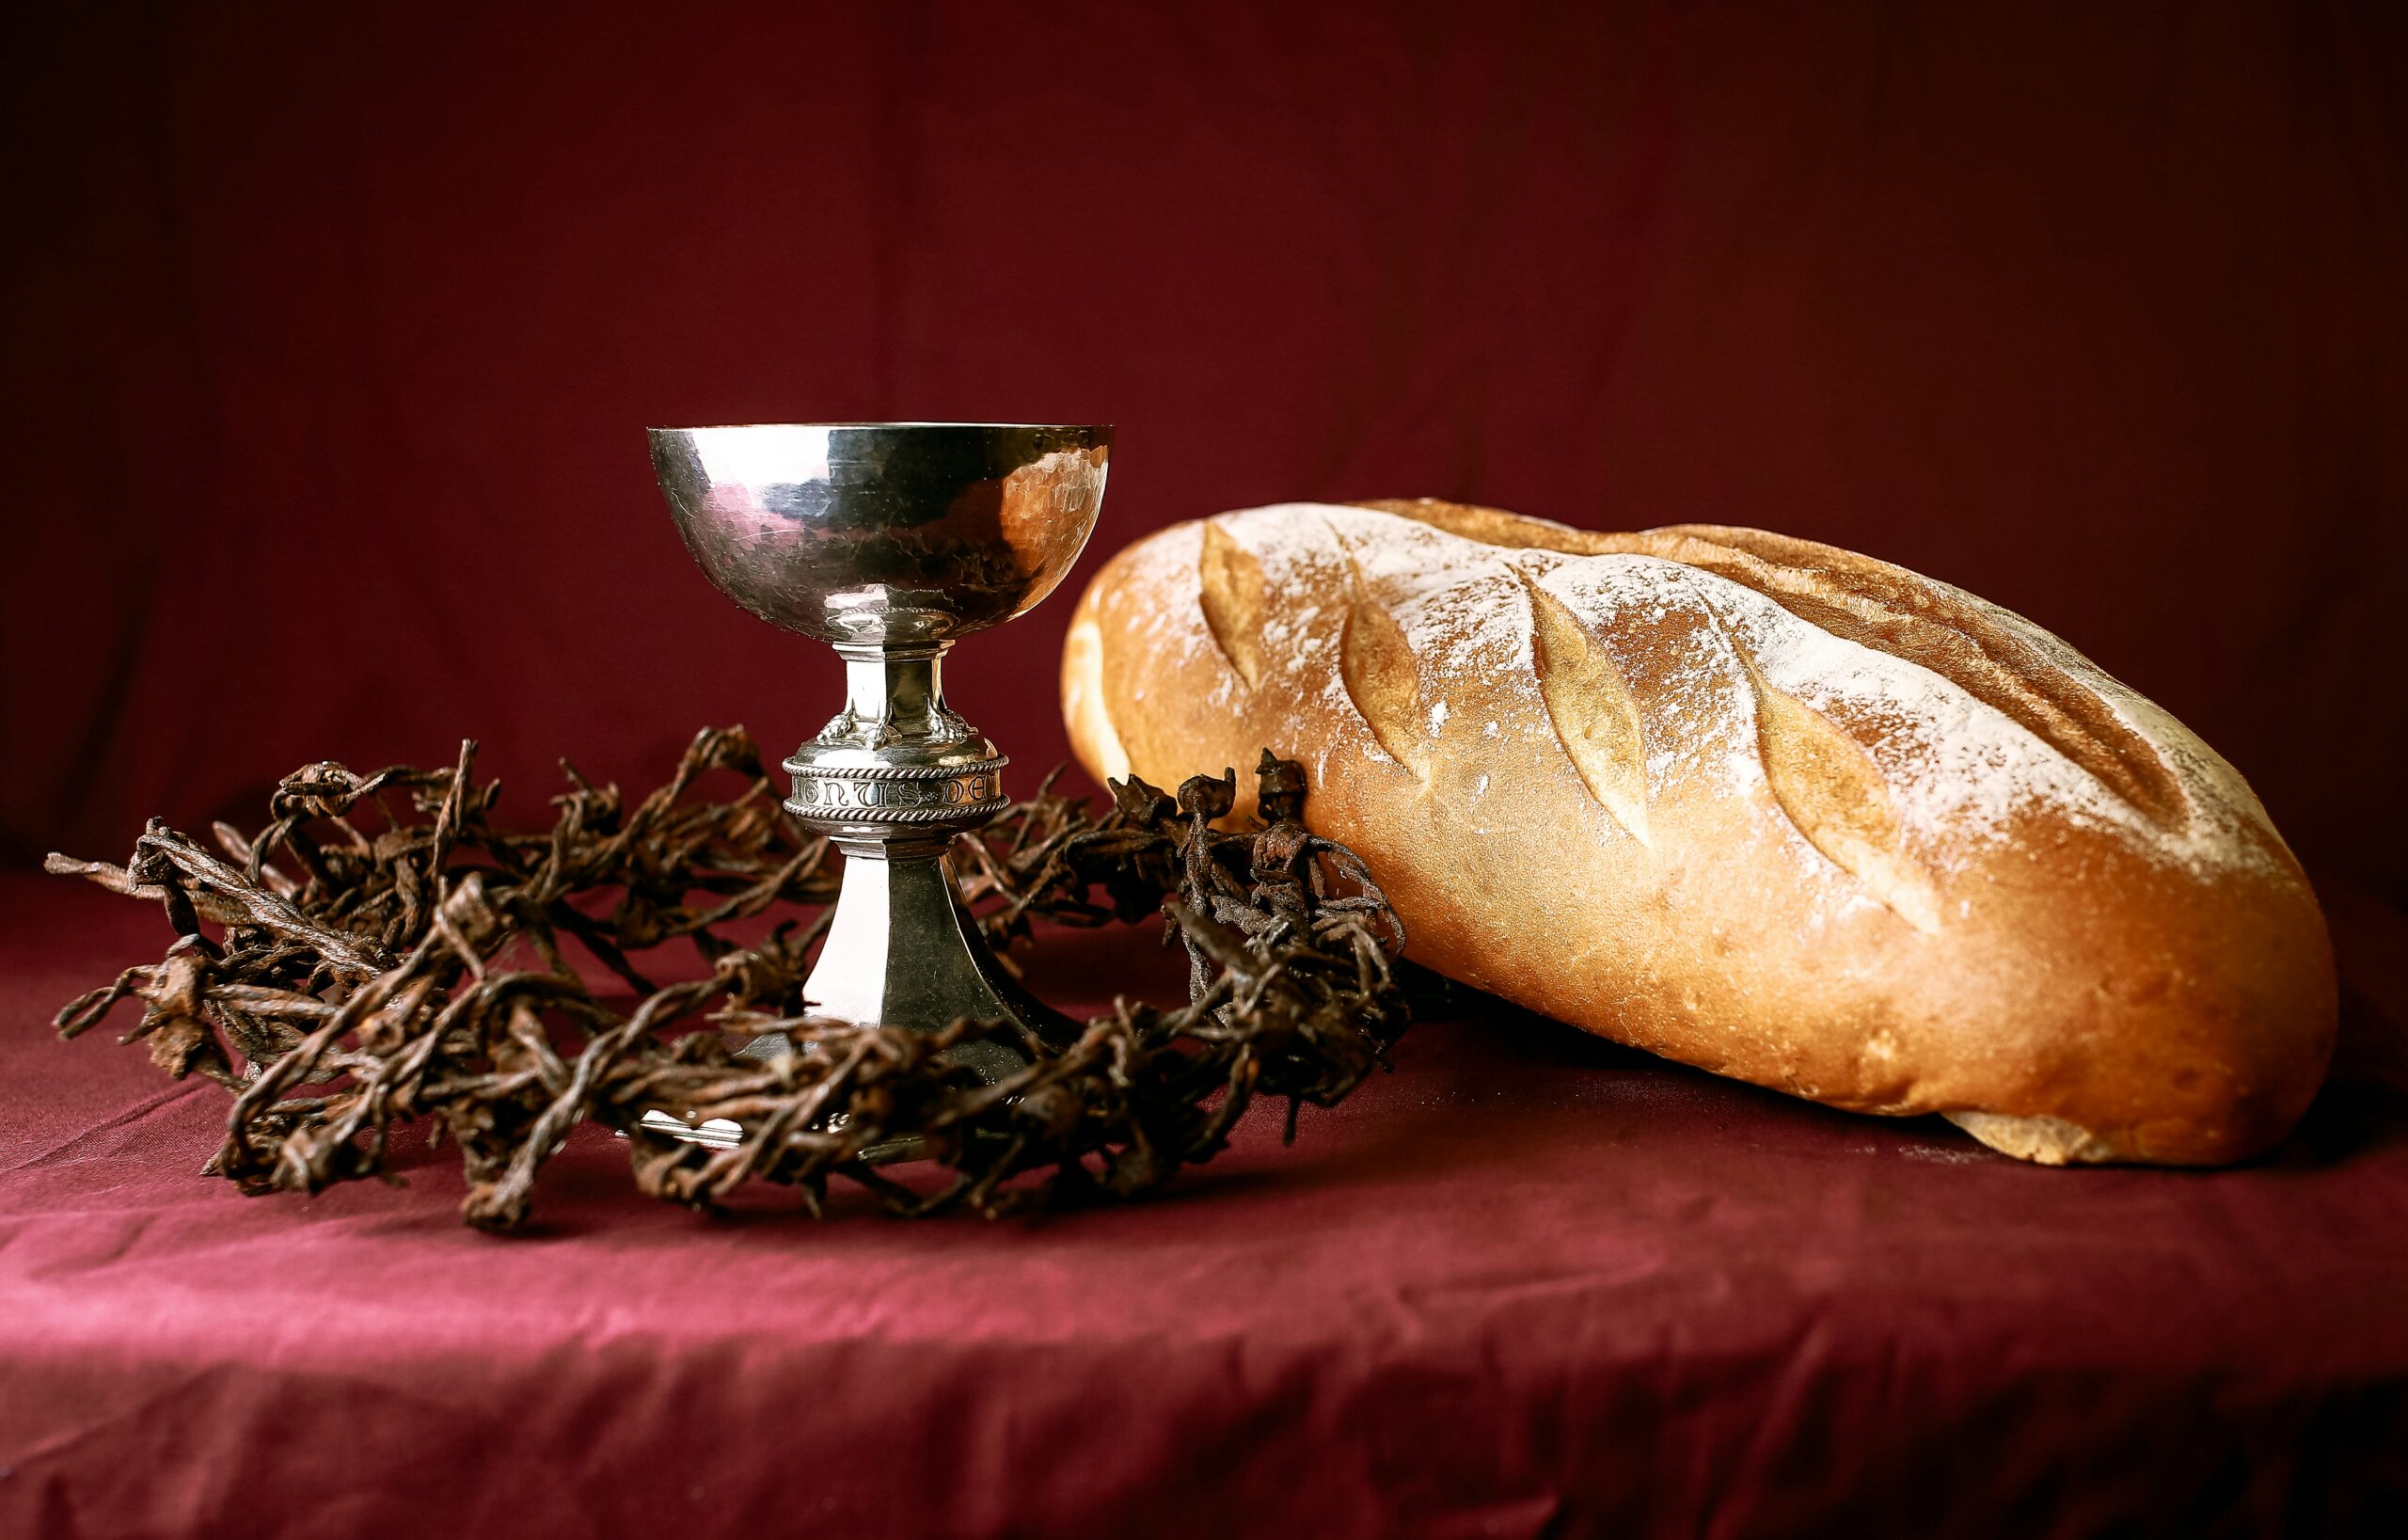 Lessons From the Early Church: Sermons and Communion